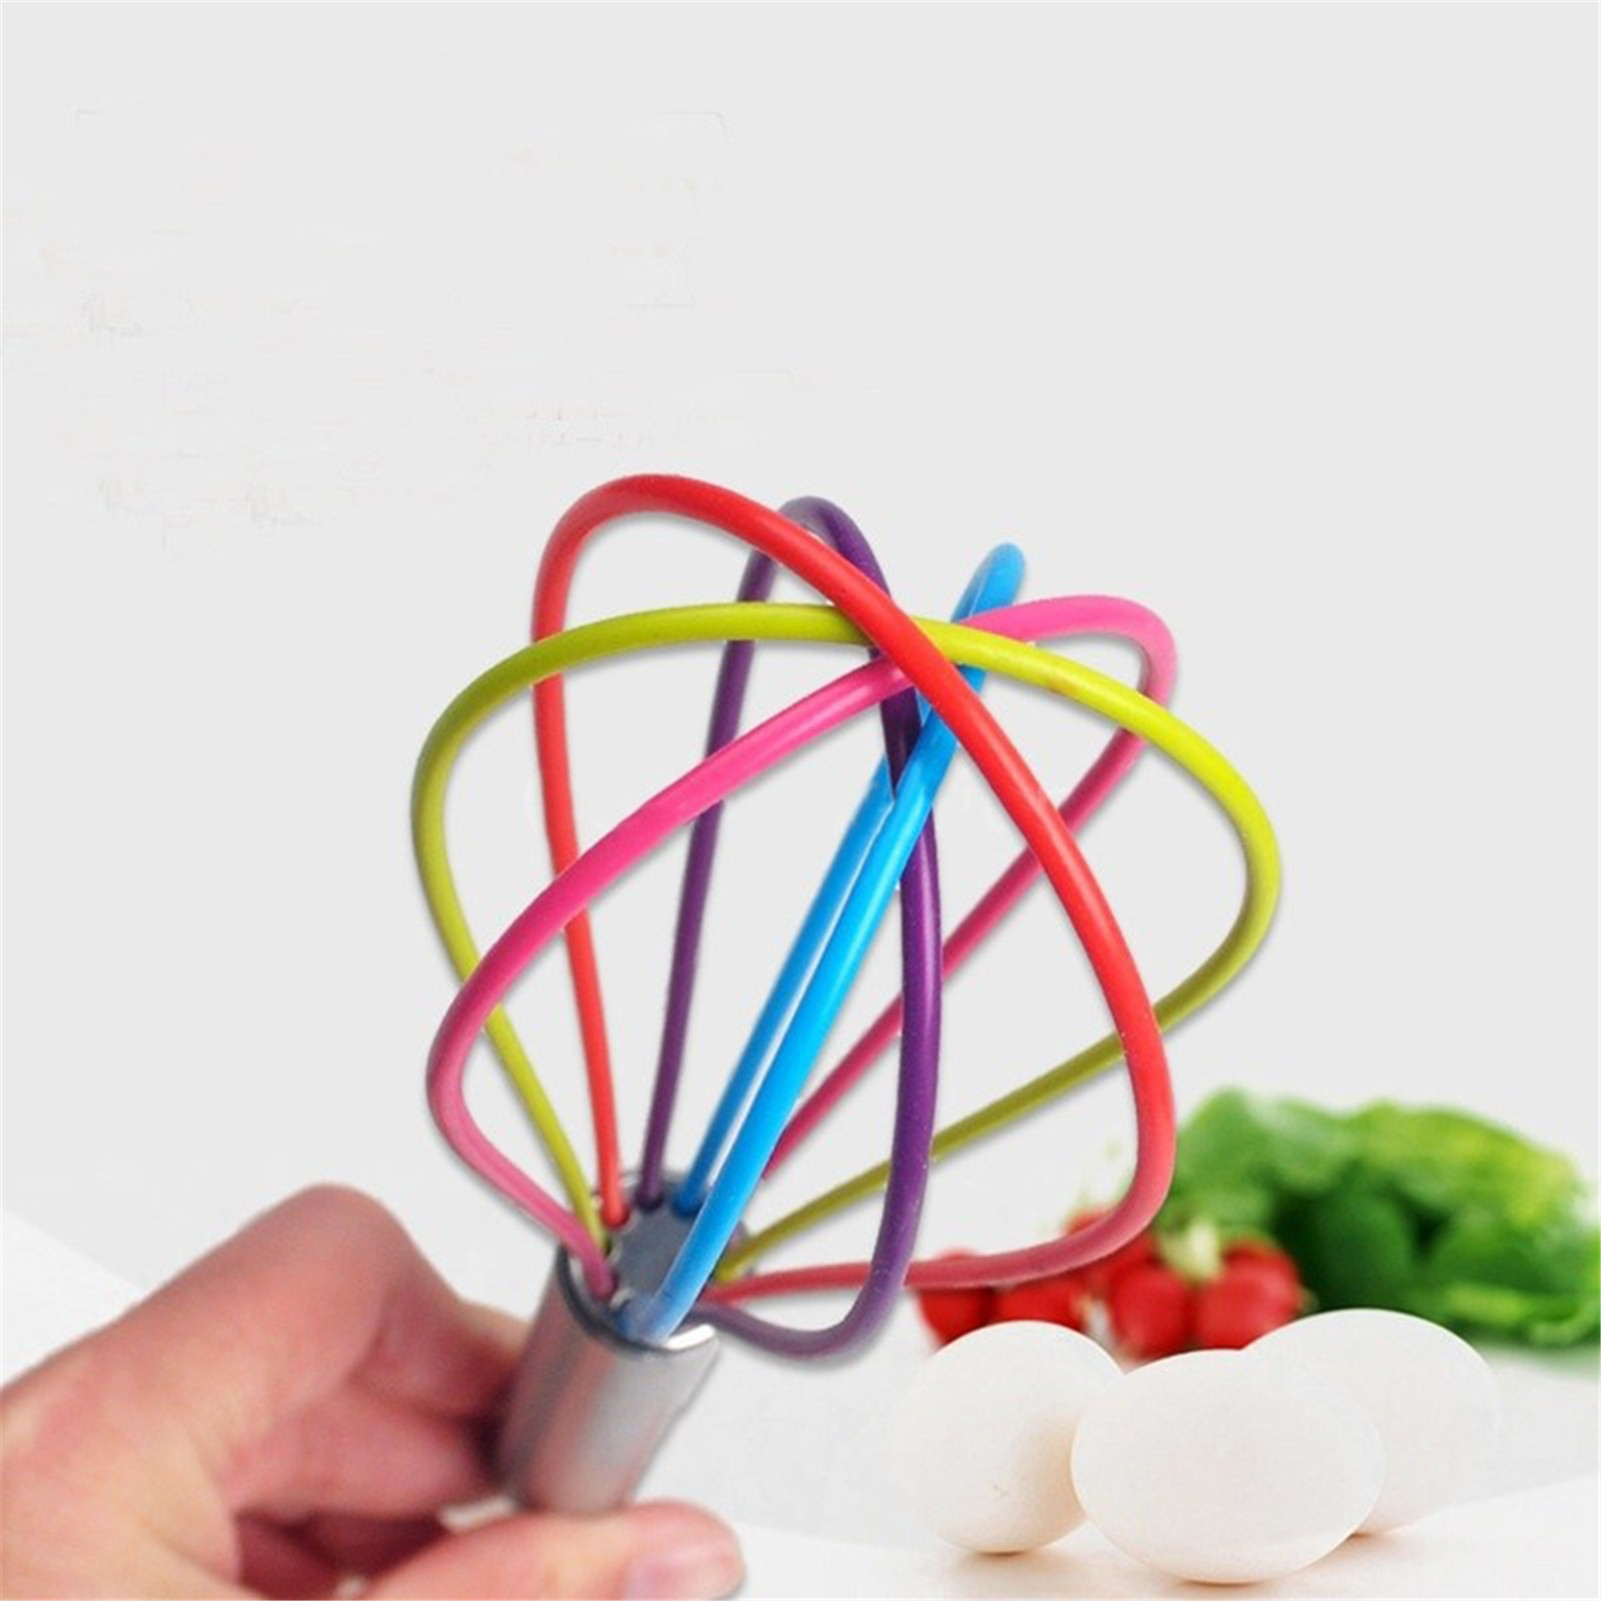 Ludlz Kitchen Collection Stainless Steel Balloon Egg Whisk,Multicolor Stainless Steel Balloon Wire Egg Beater Whisk Tool Kitchen Mixer - image 3 of 7